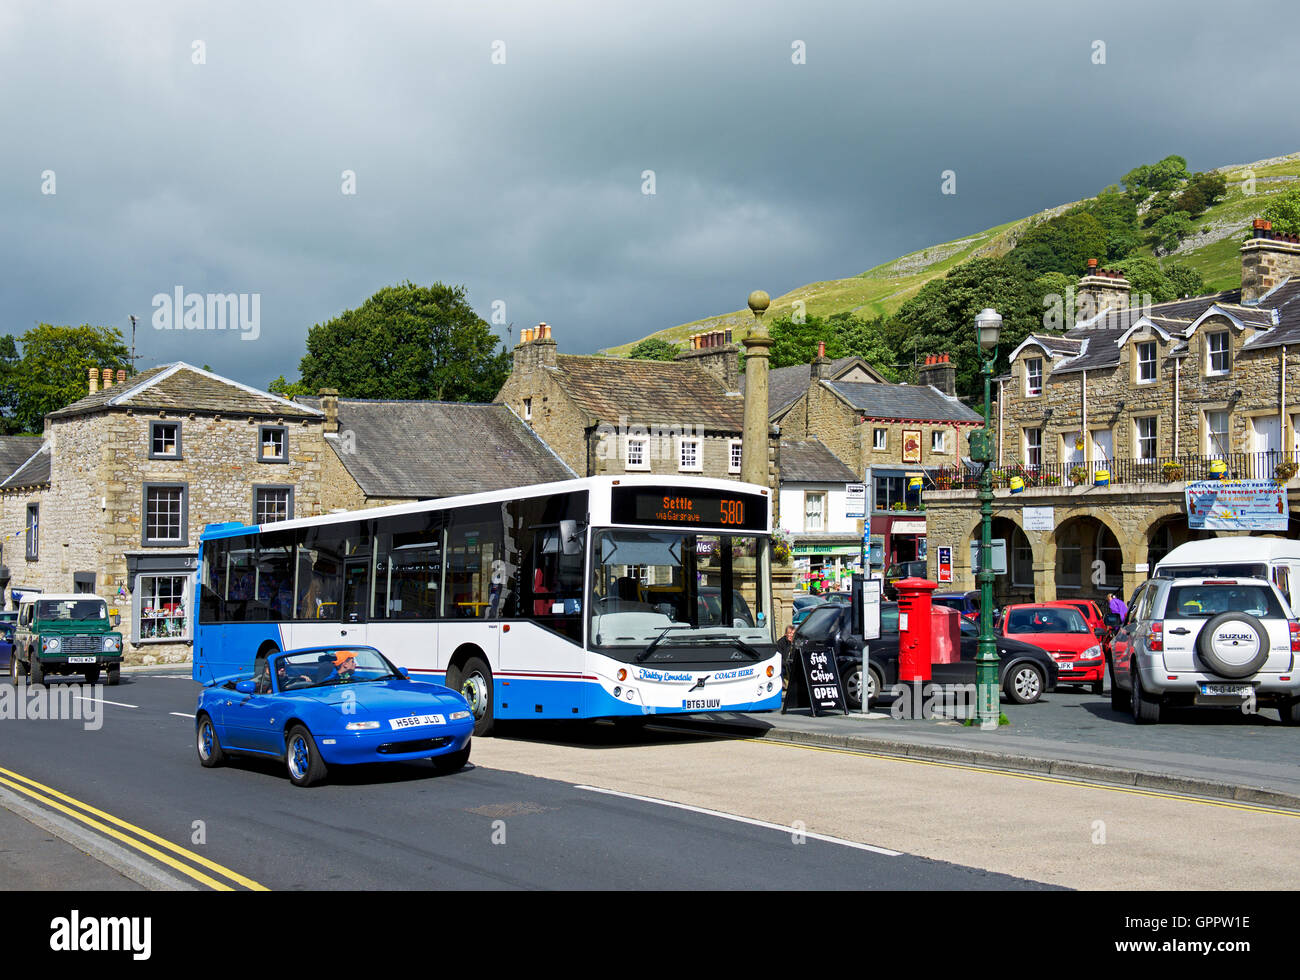 Bus and sports car in the market place, Settle, North Yorkshire, England UK Stock Photo